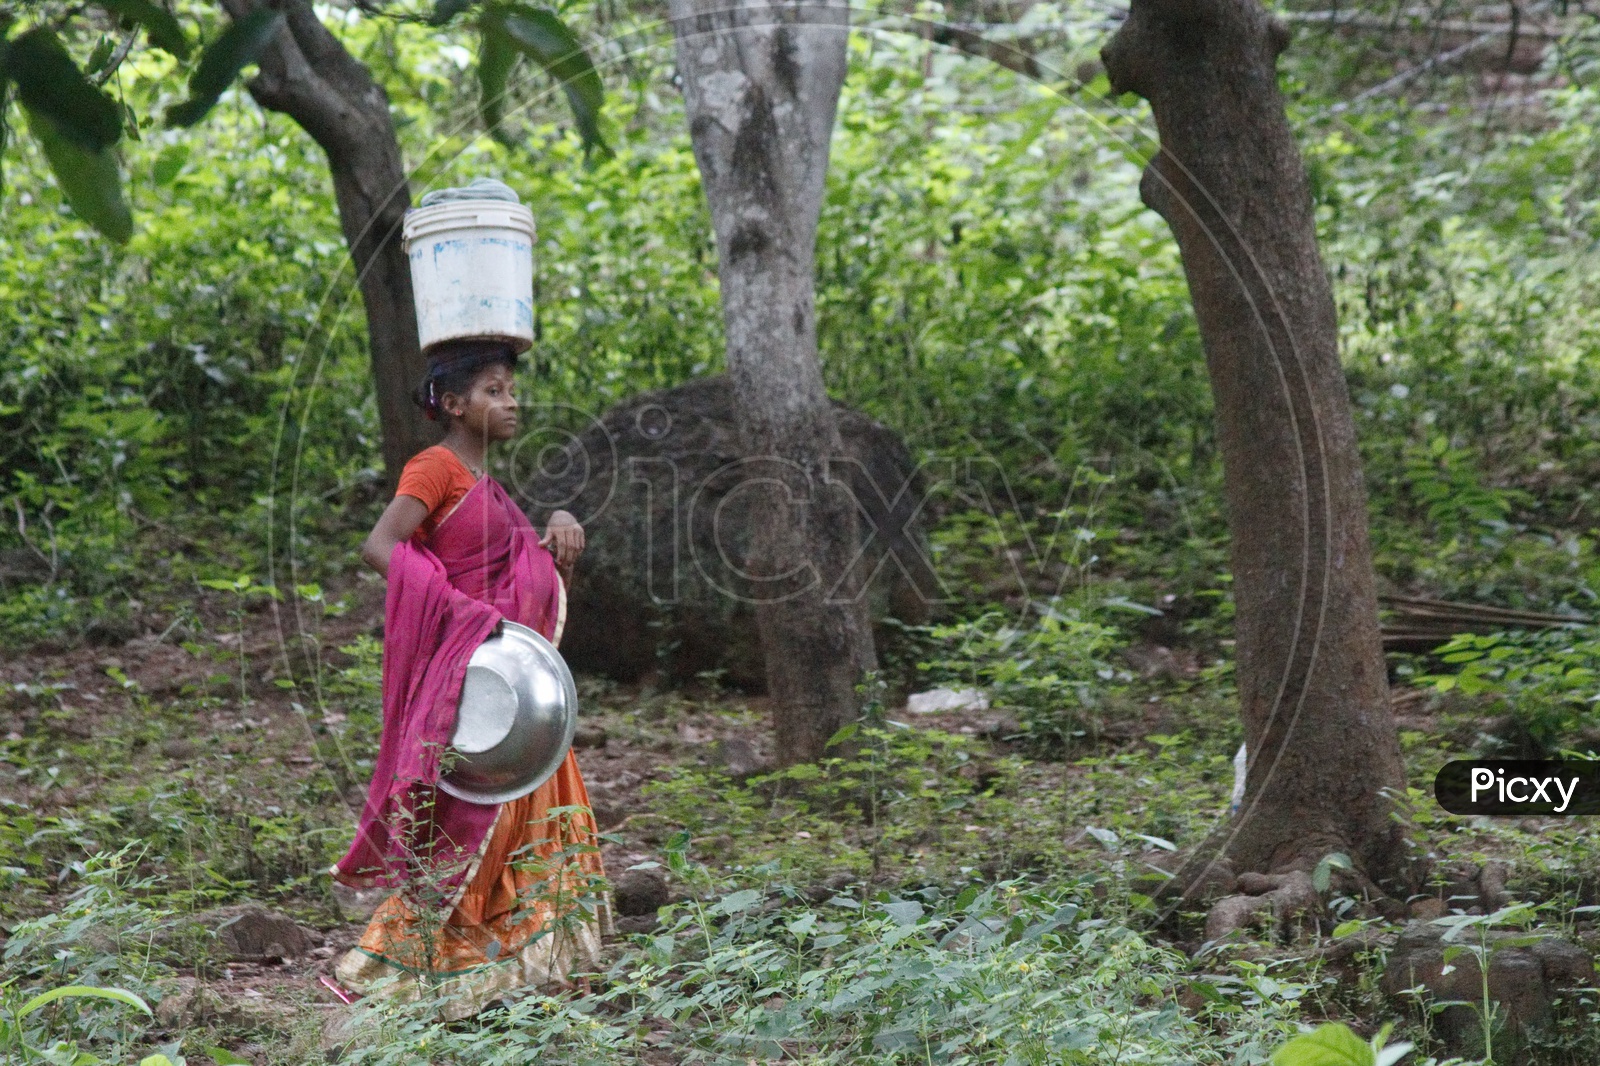 A woman carrying clothes in a bucket on her head.